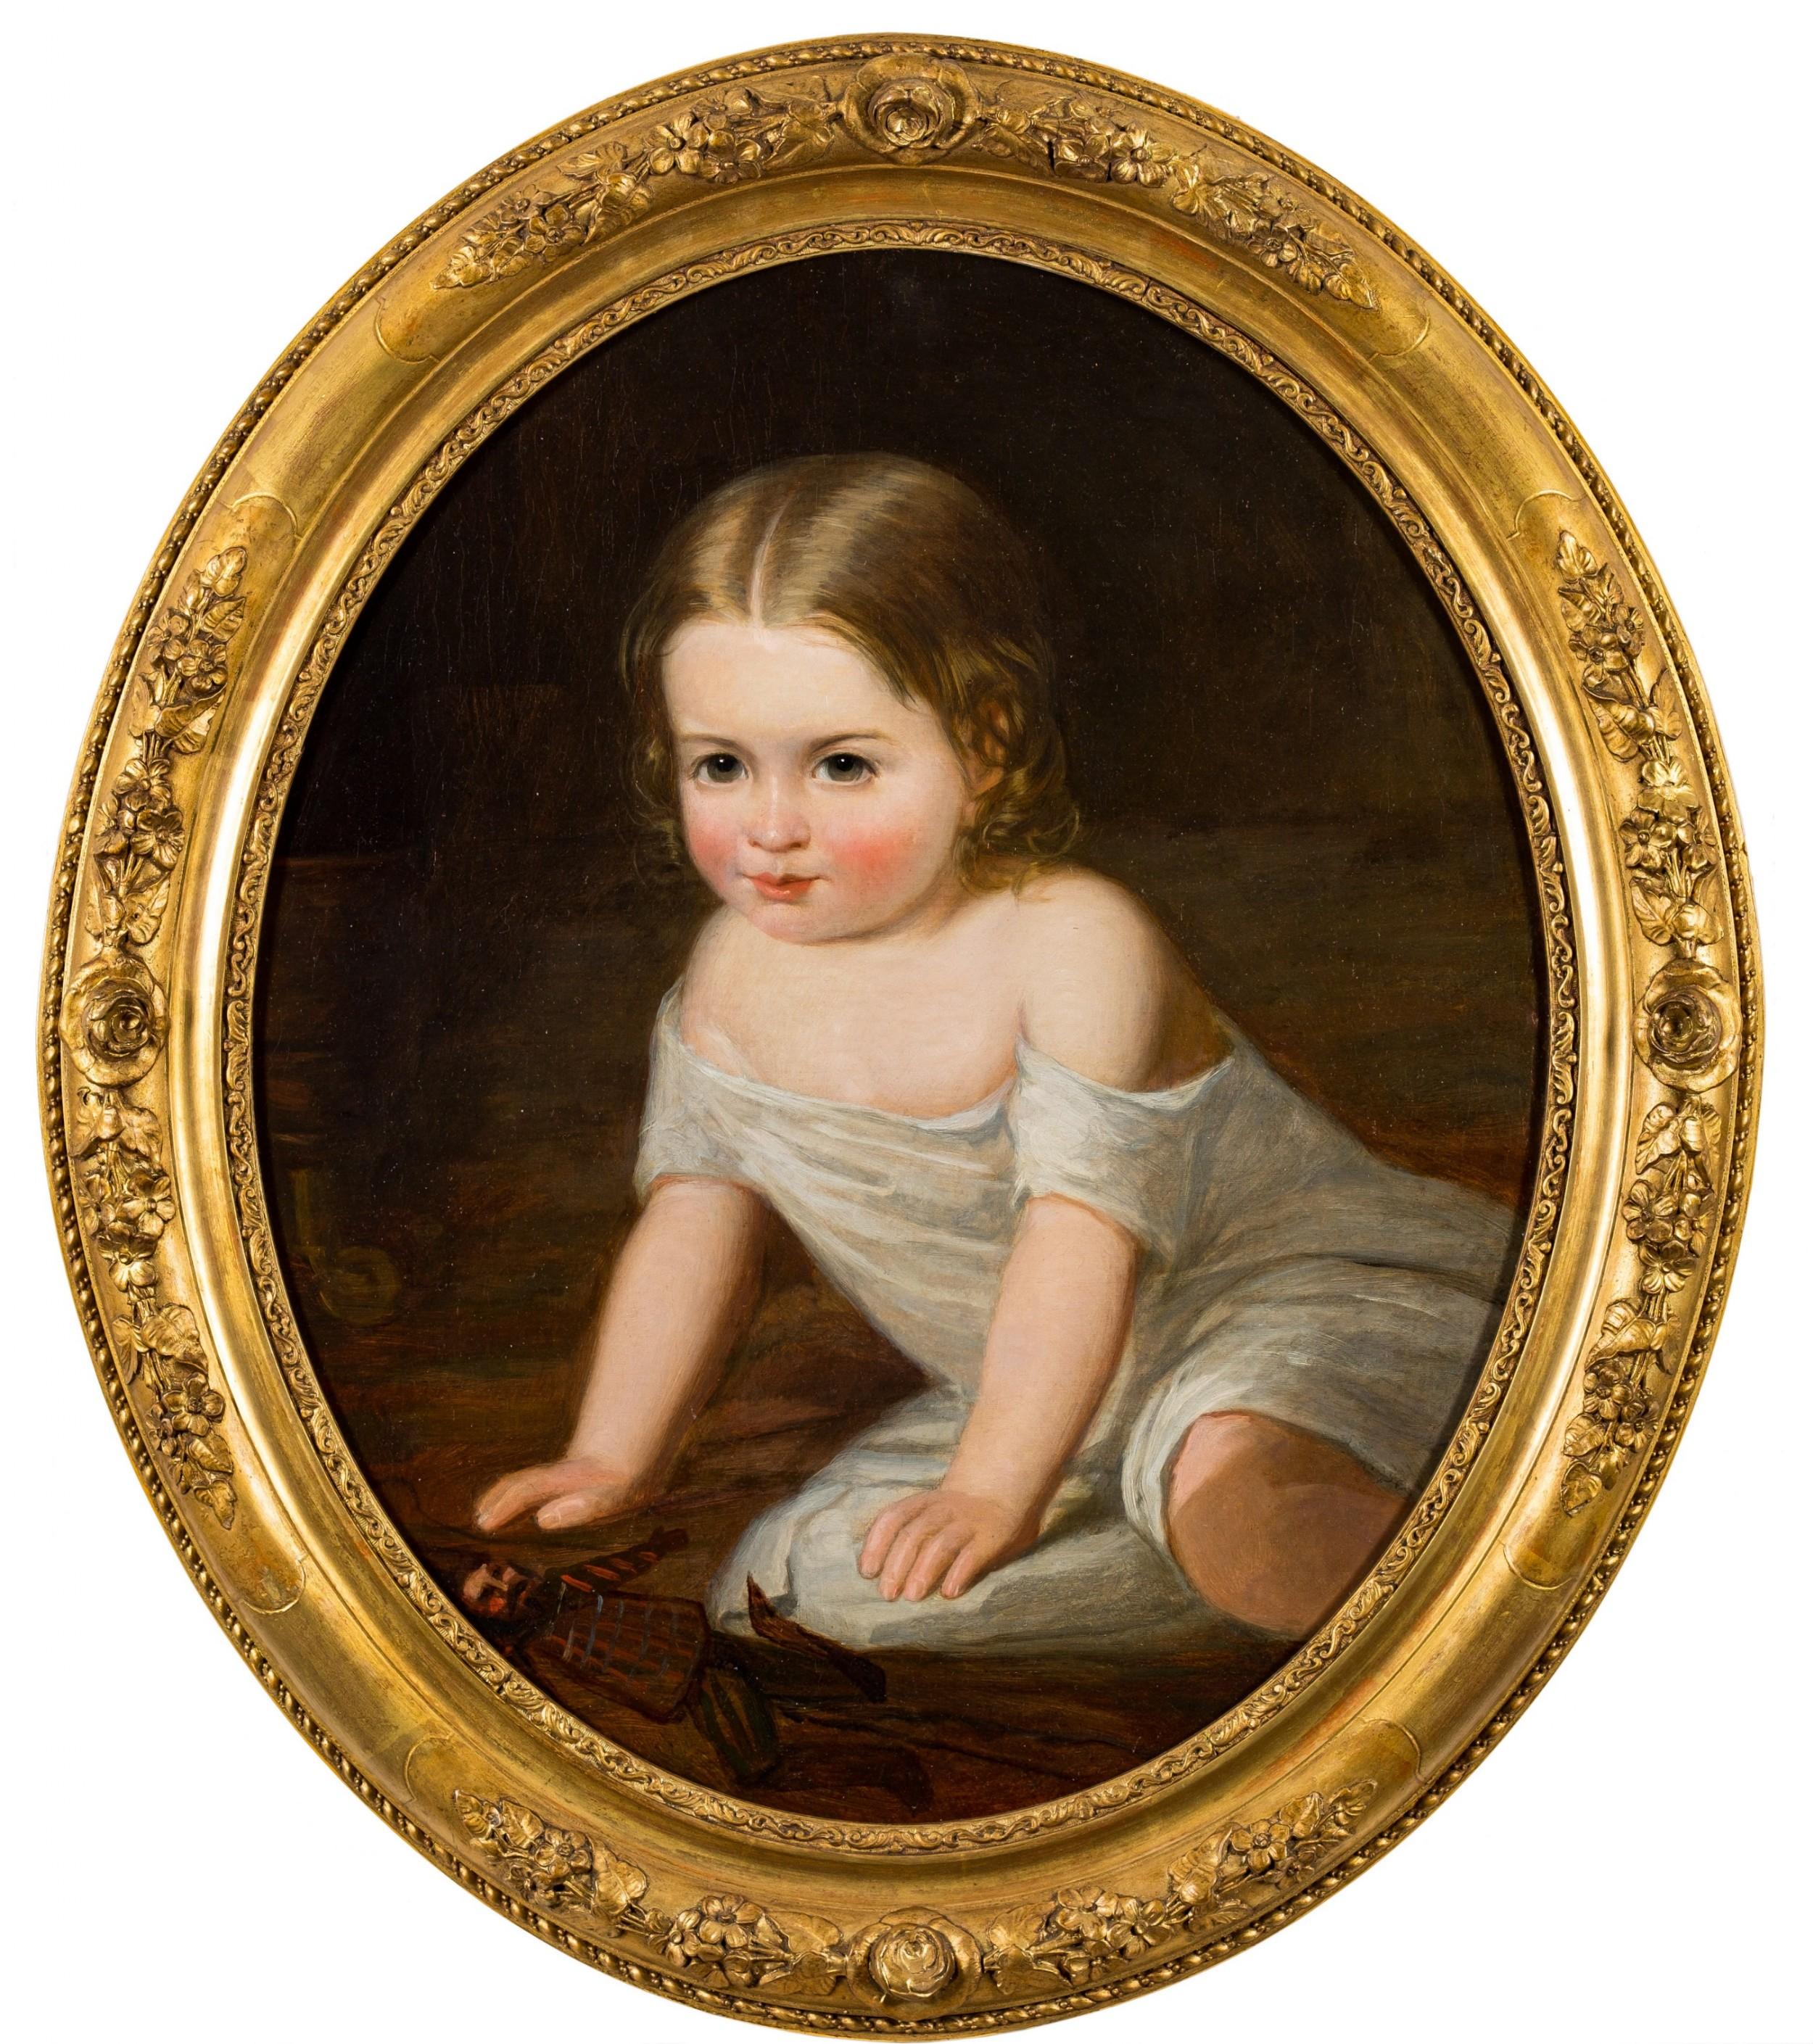 19th century portrait, child at play ,Attributed to Henry Tanworth Wells
A beautiful oval portrait of a young child at play, attributed to the portrait painter Henry Tanworth Wells.
finely executed, this oil on canvas is in excellent condition.